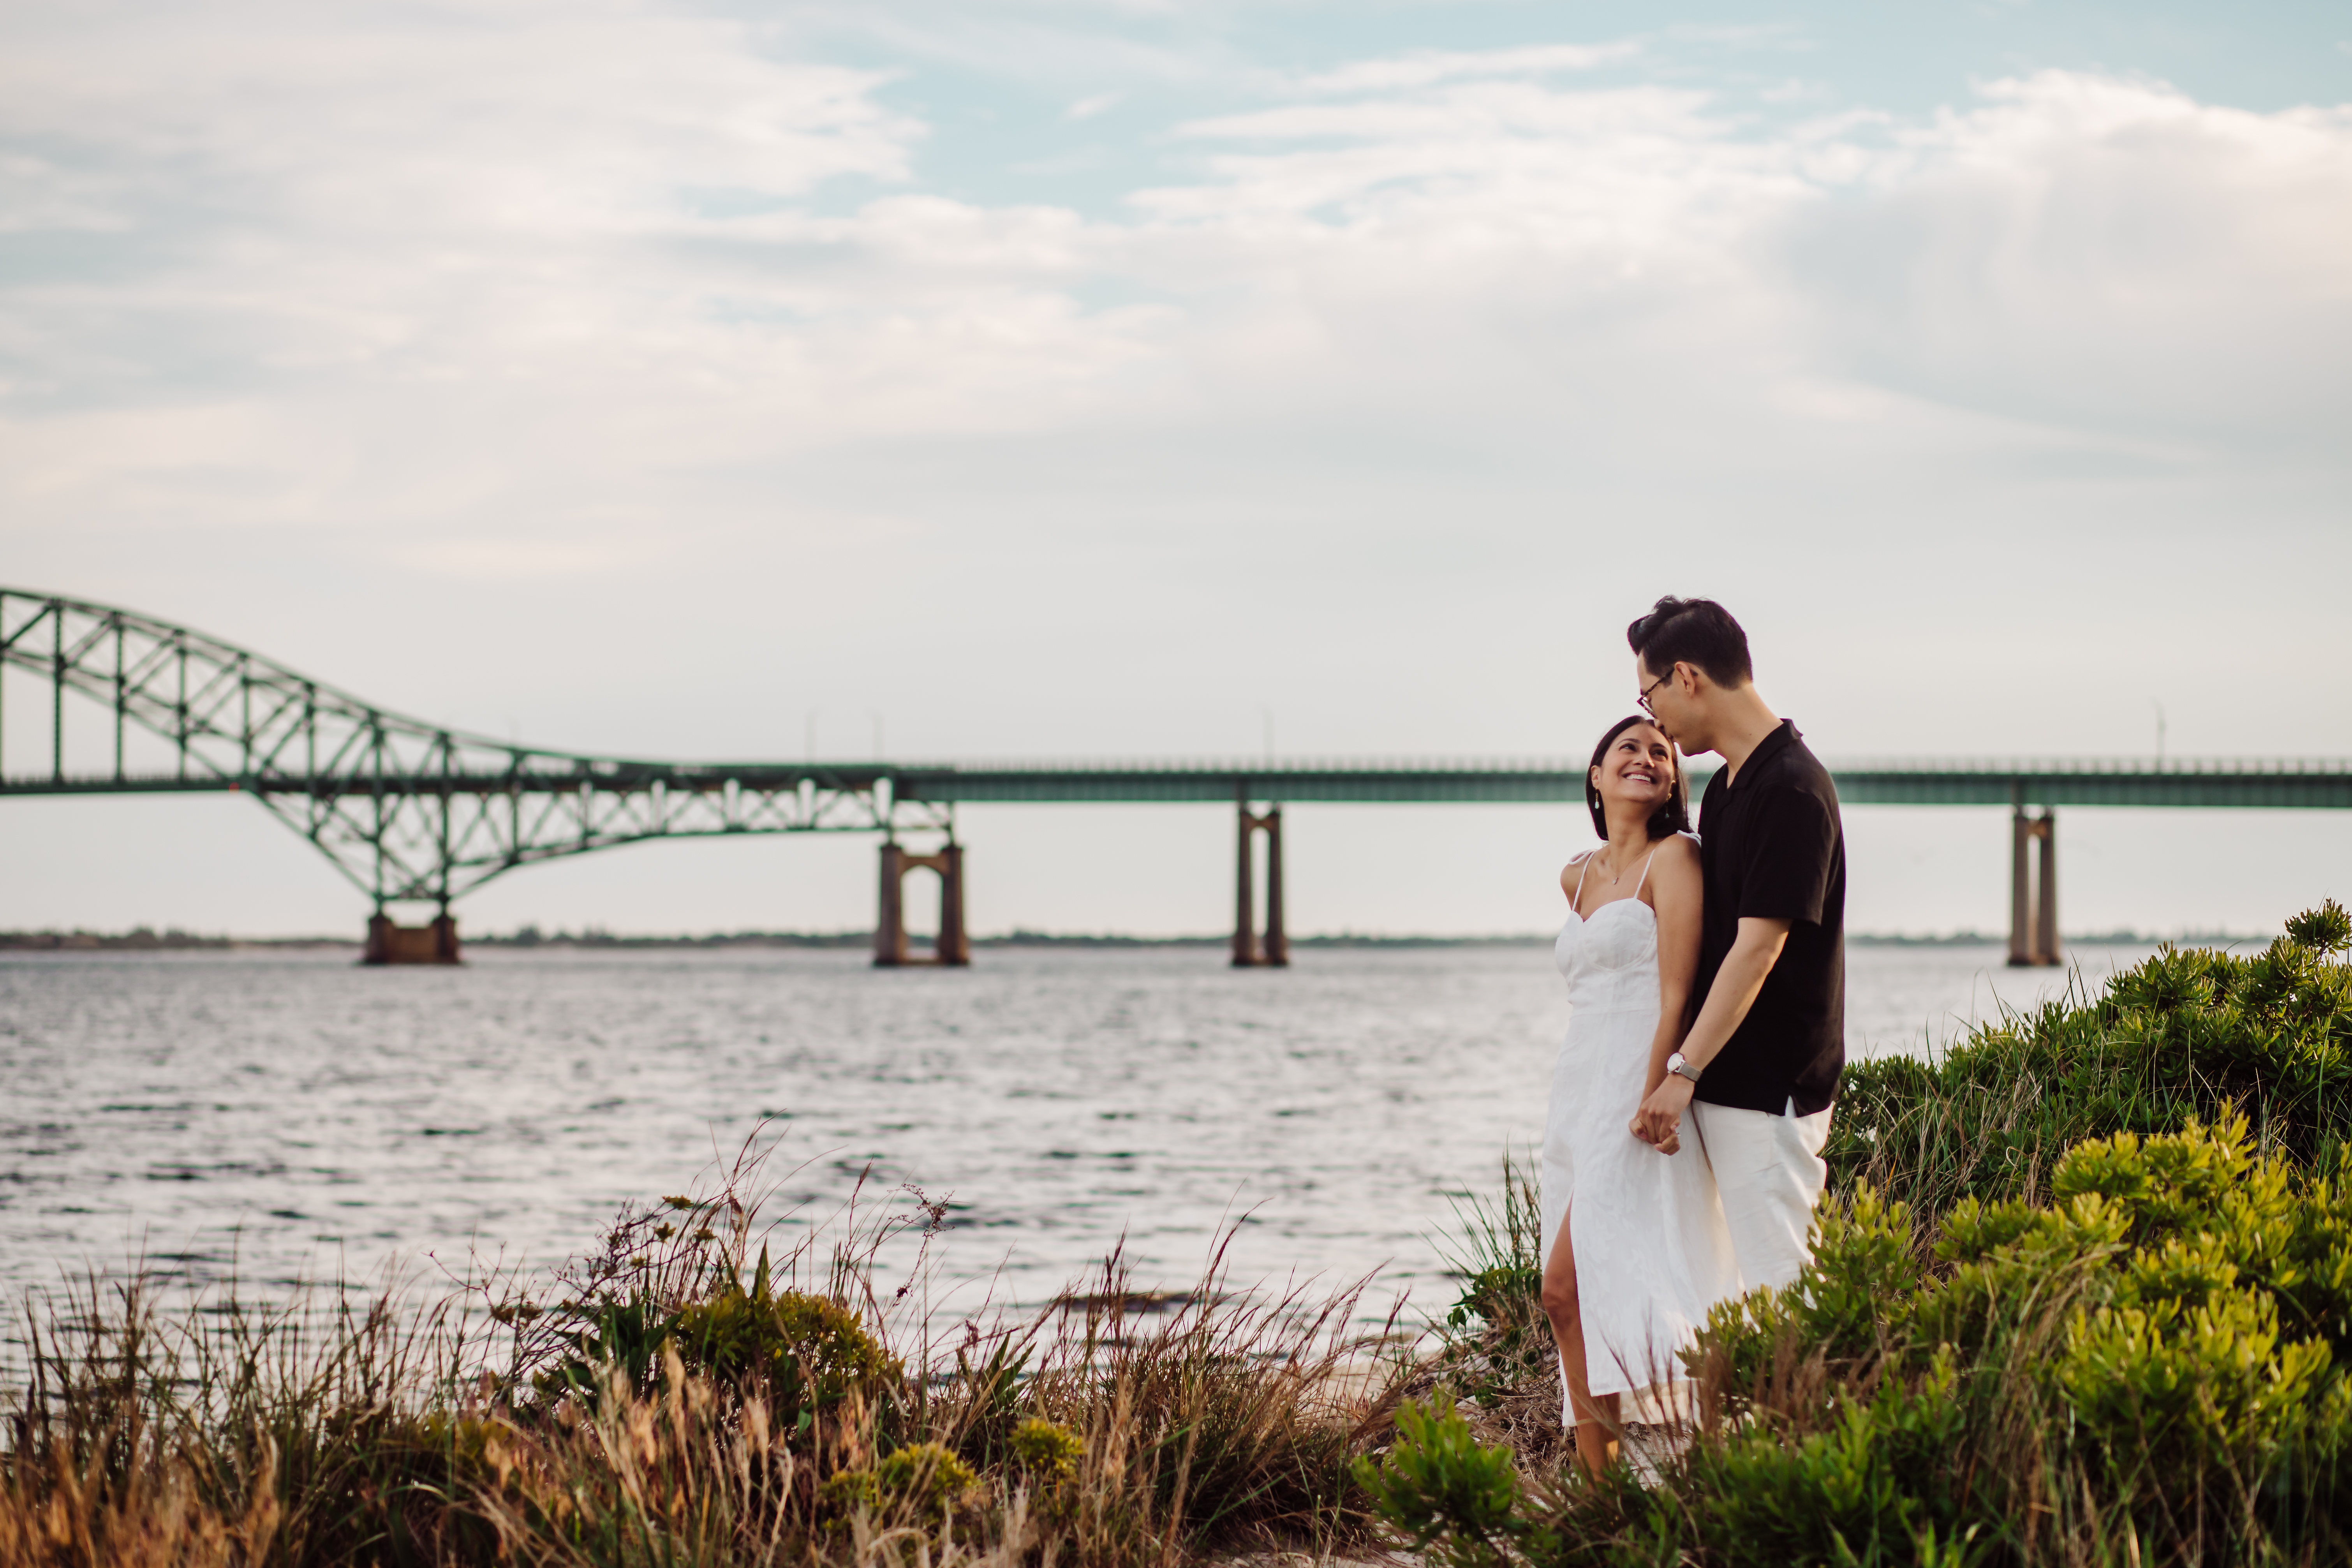 Chris and Angela's engagement session at Captree State Park during golden hour, with the couple sharing a loving moment in front of the iconic bridge.